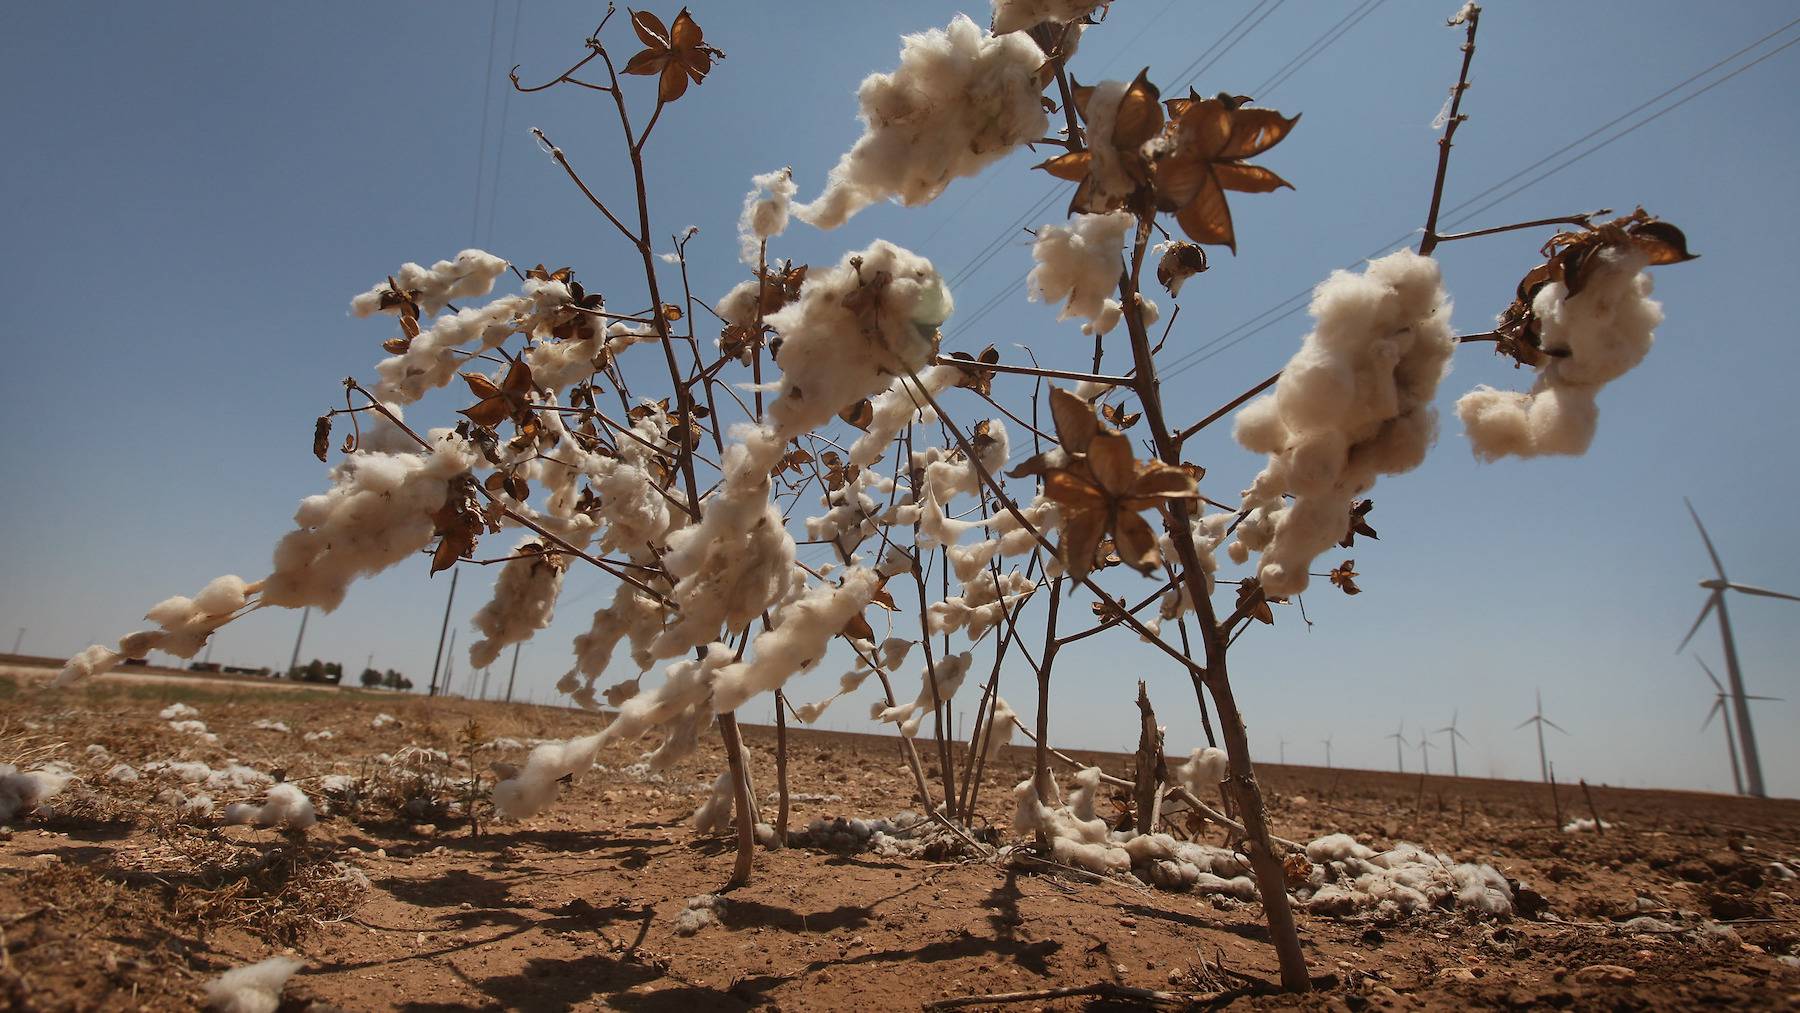 A cotton plant missed during harvest in a barren field stricken by drought.